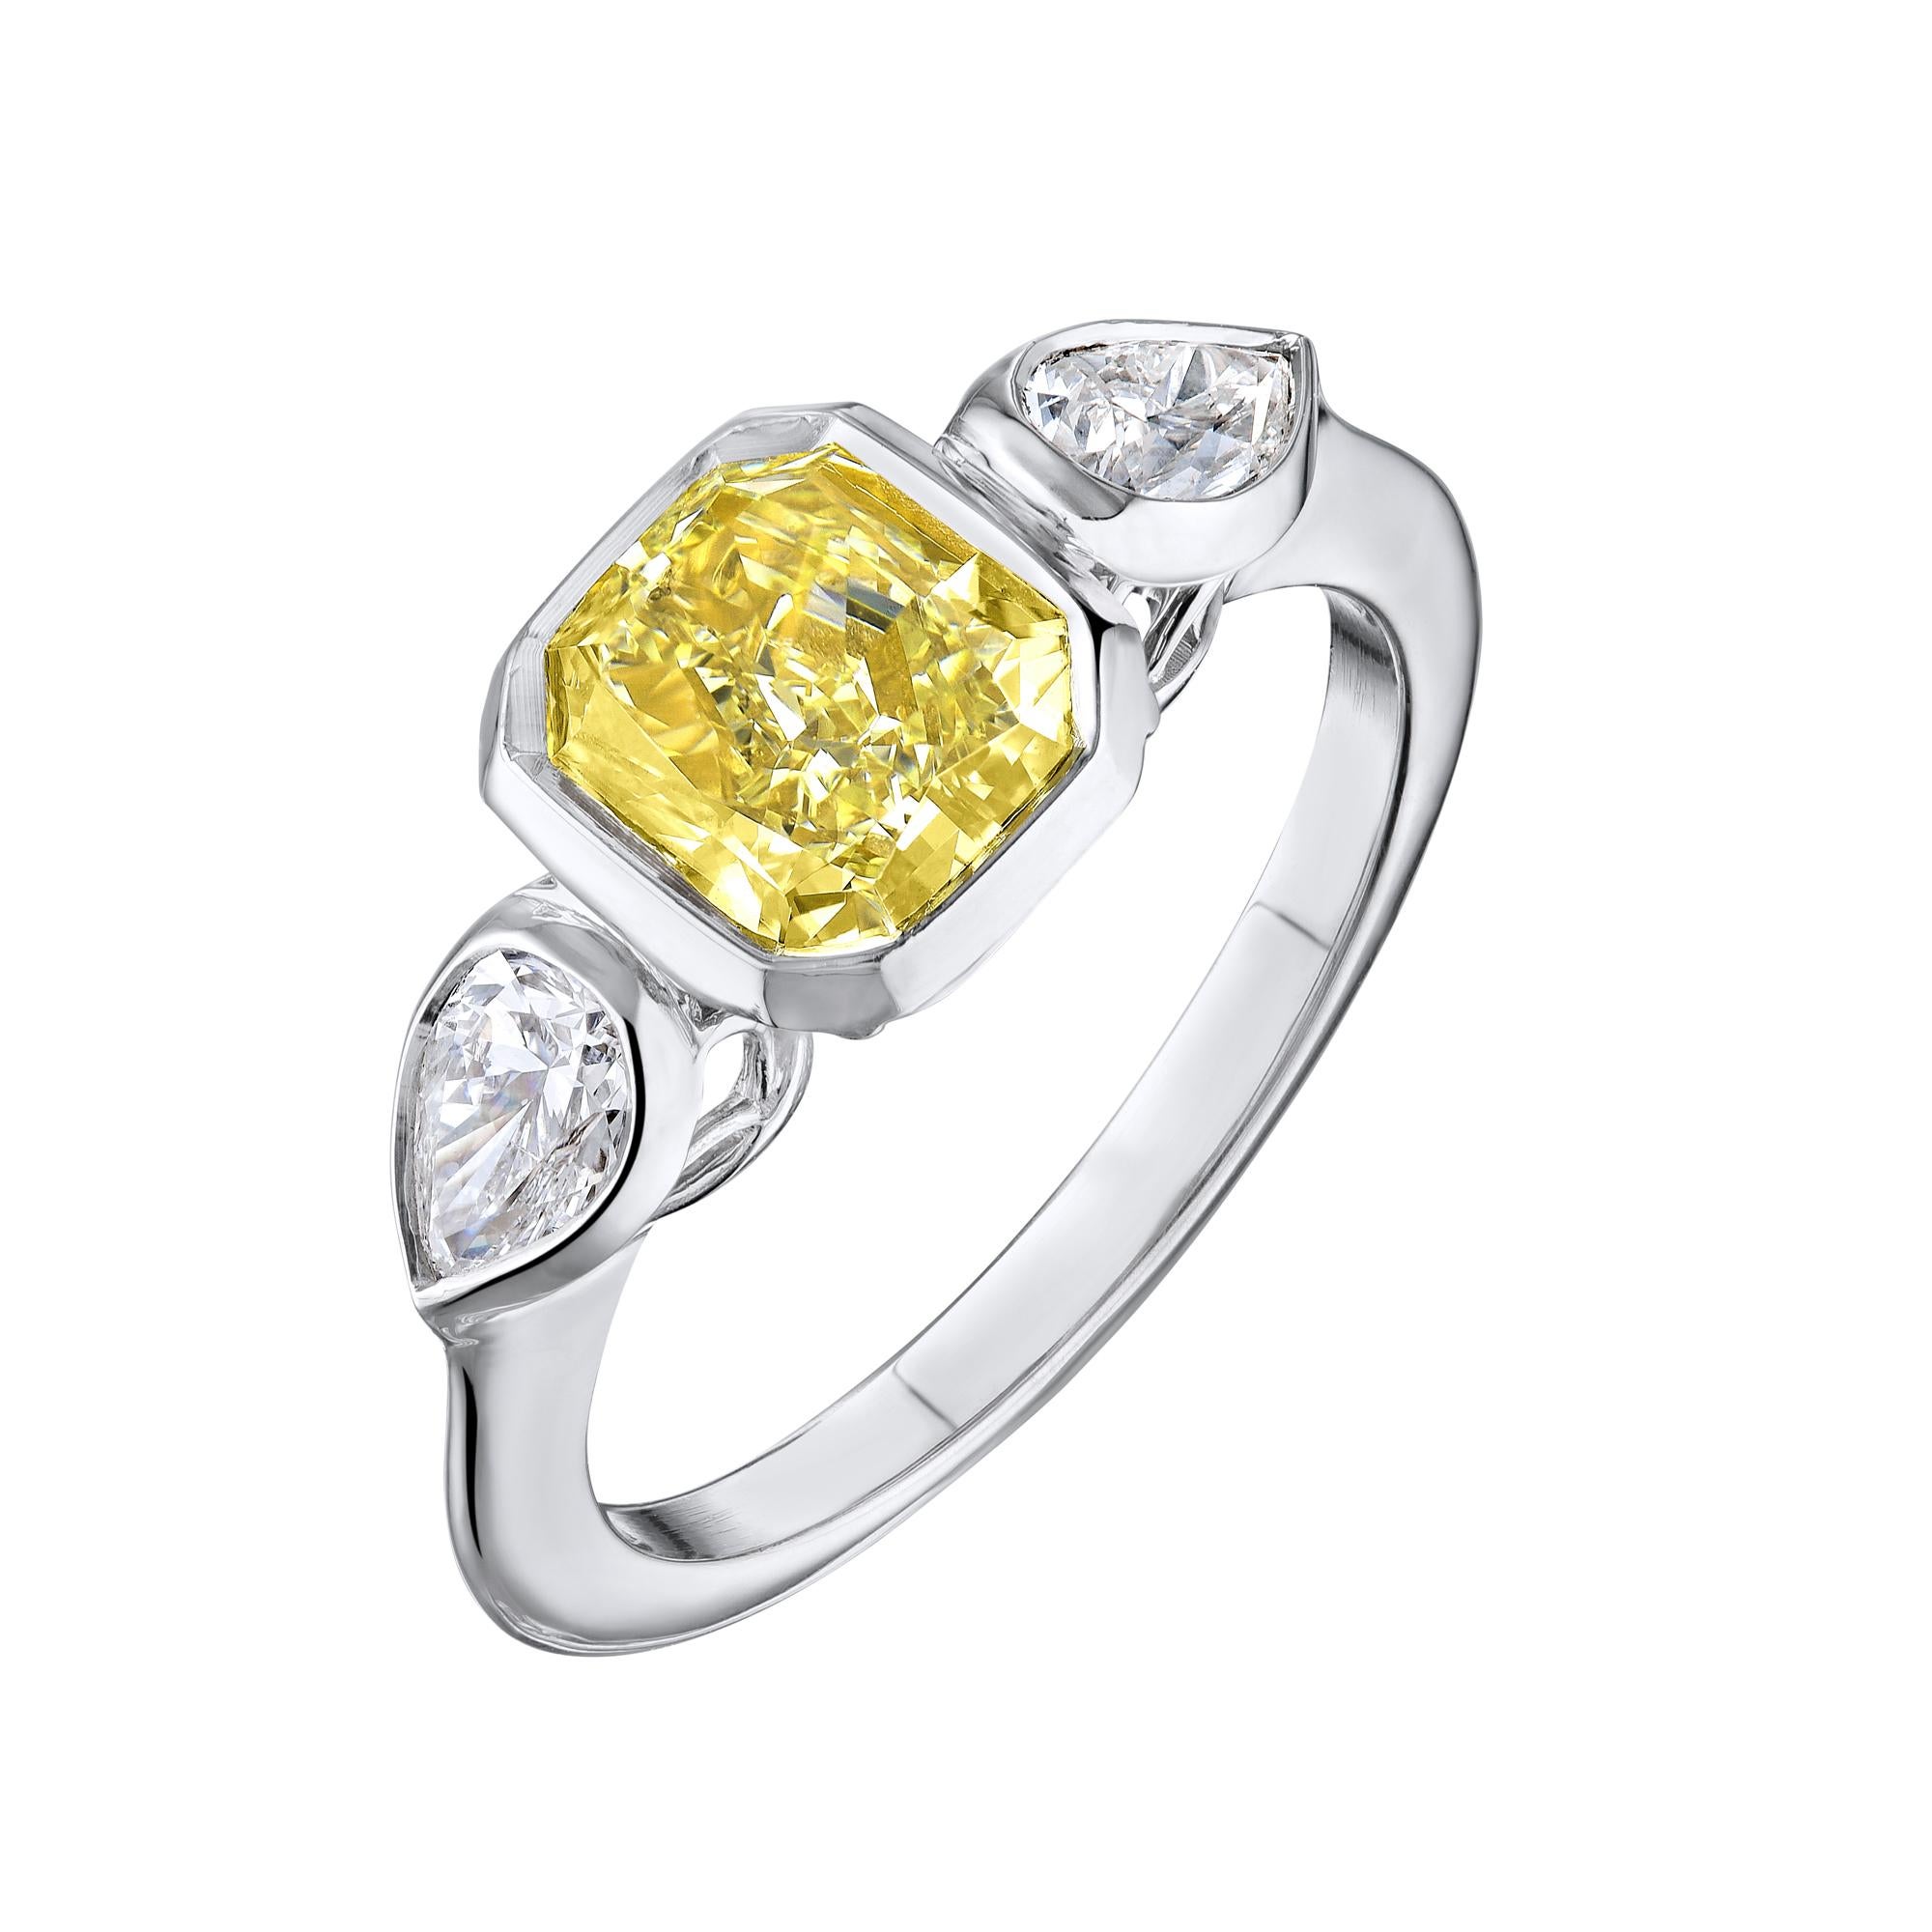 Diamond Platinum ring with GIA certificate, no.5141964995. Center stone: 1.63 ct Cut-cornered Rectangular Modified Brilliant cut Natural Fancy Light Yellow VS2 diamond, 7.08 x 6.20 x 4.01 mm. Side stone are: approximately .50 ct Pear shape cut